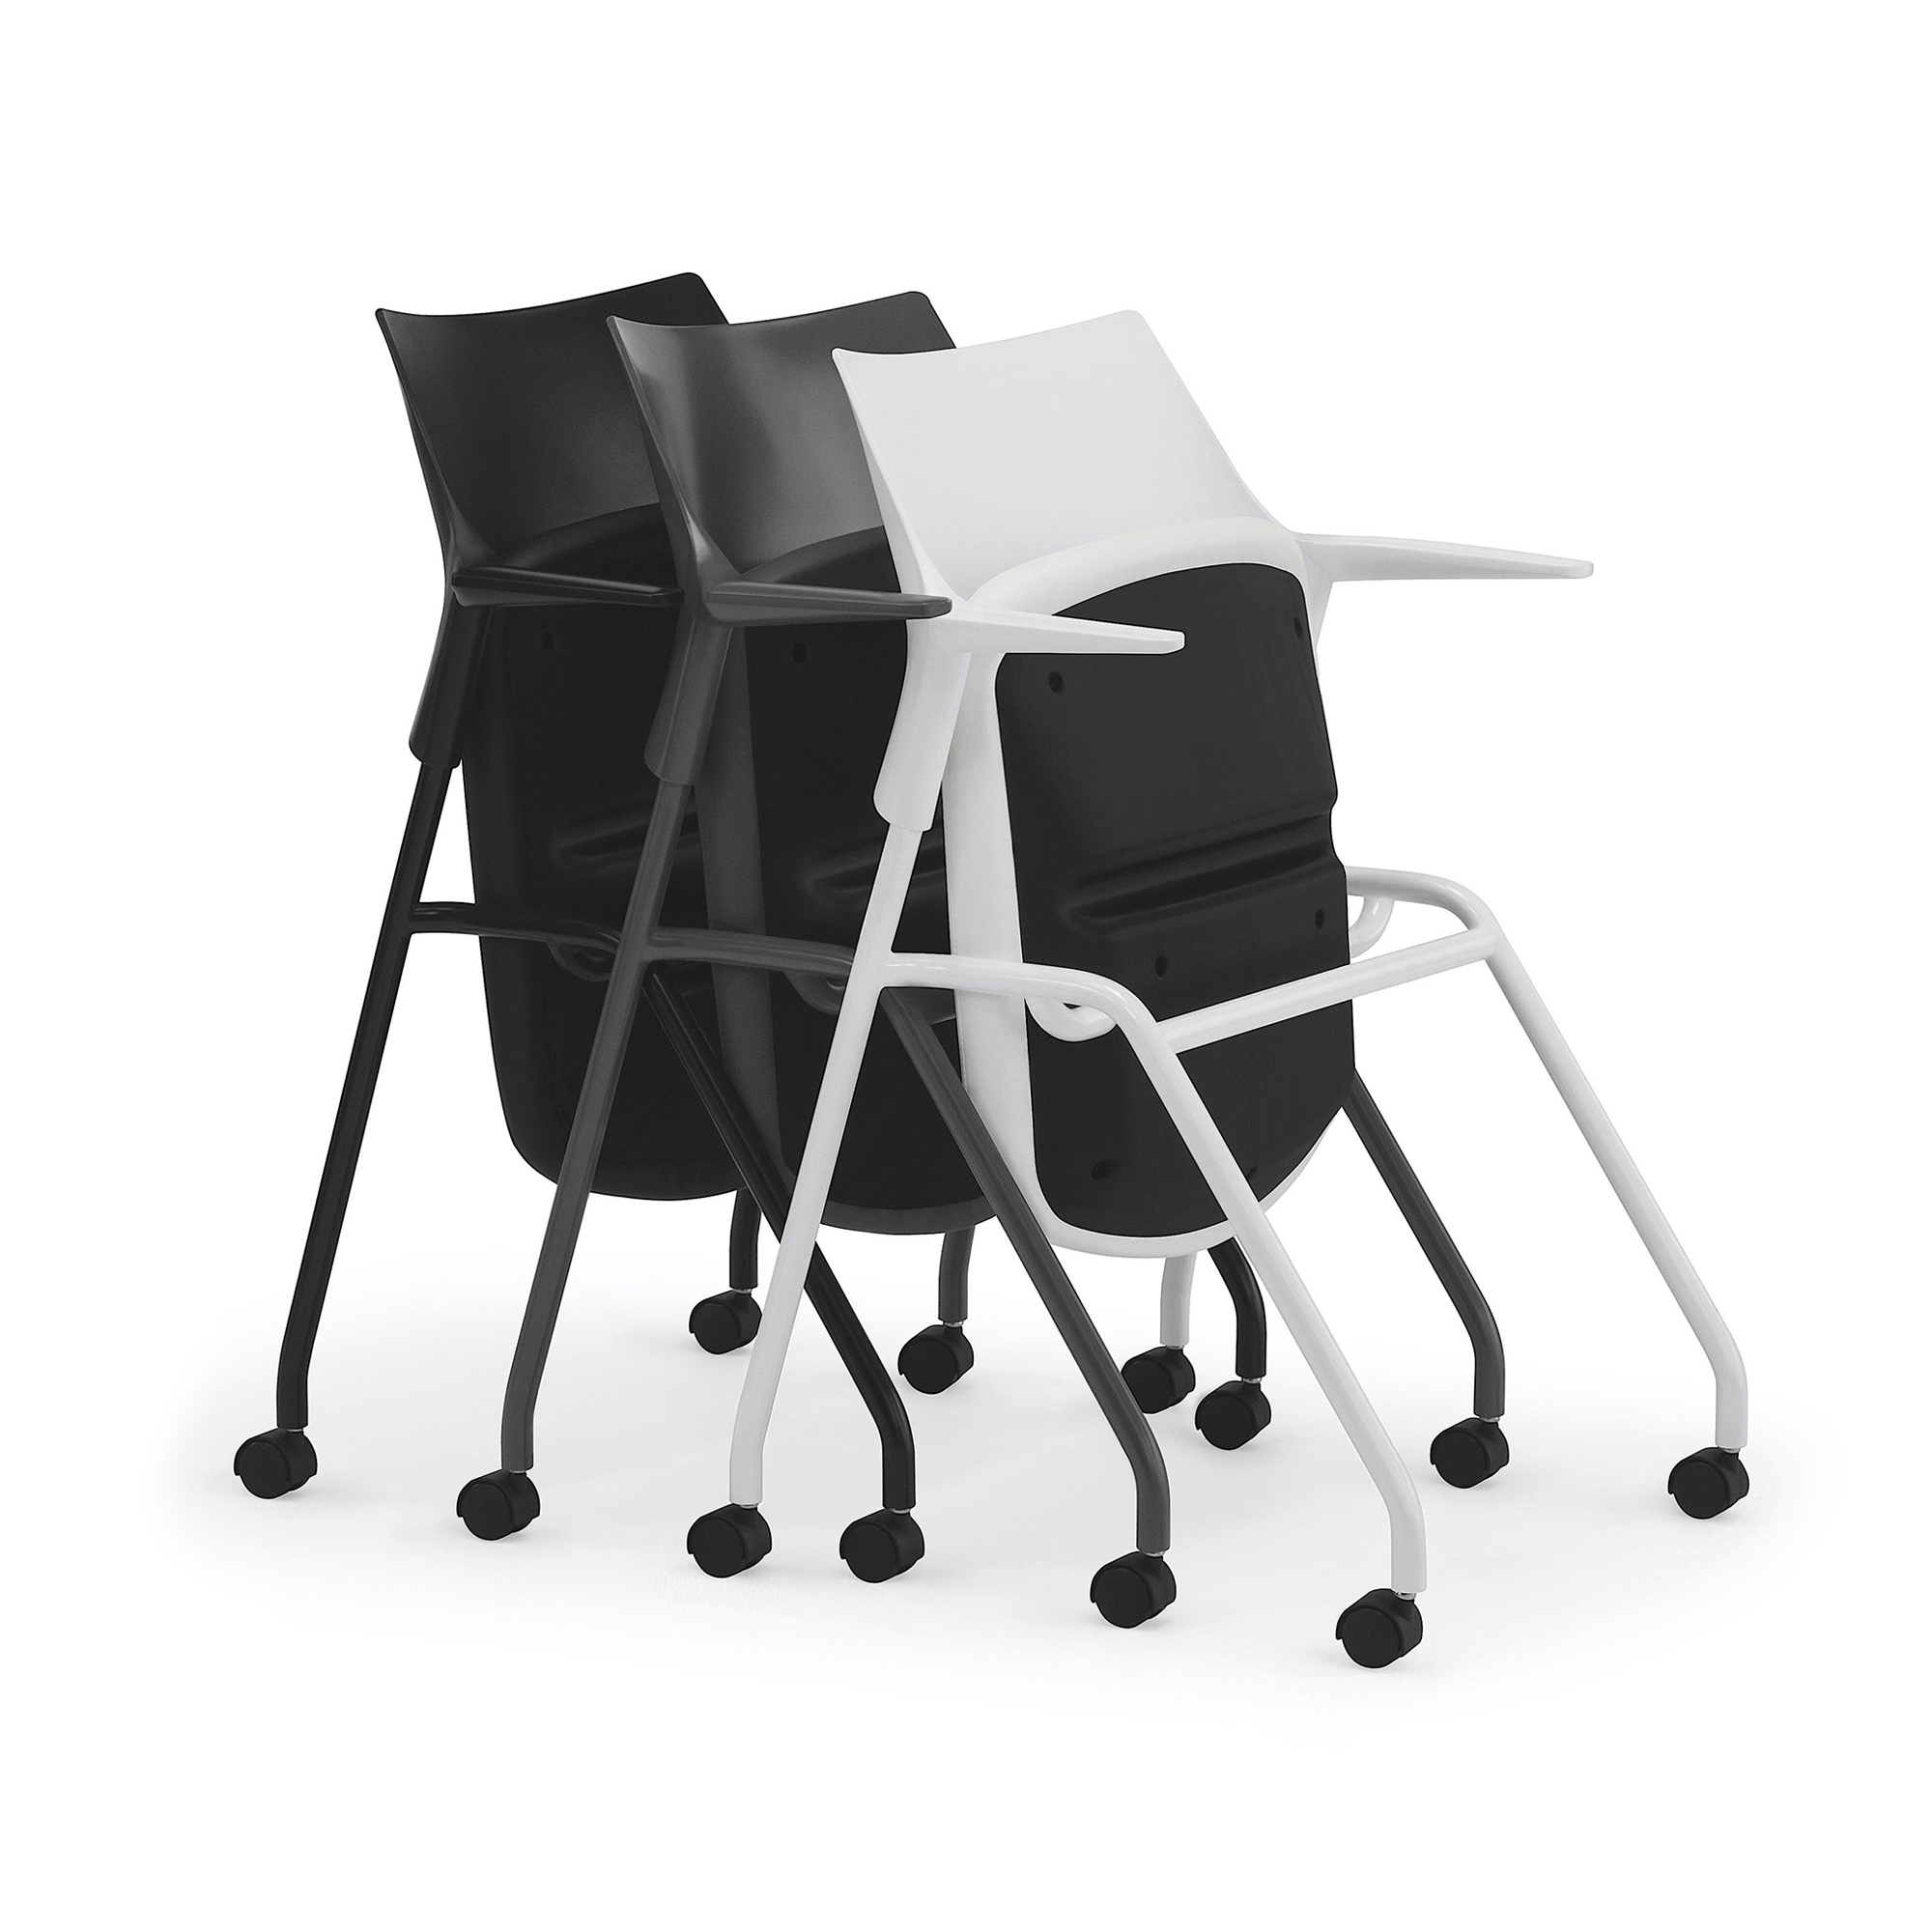 Faction Nesting Chairs, Nested Example